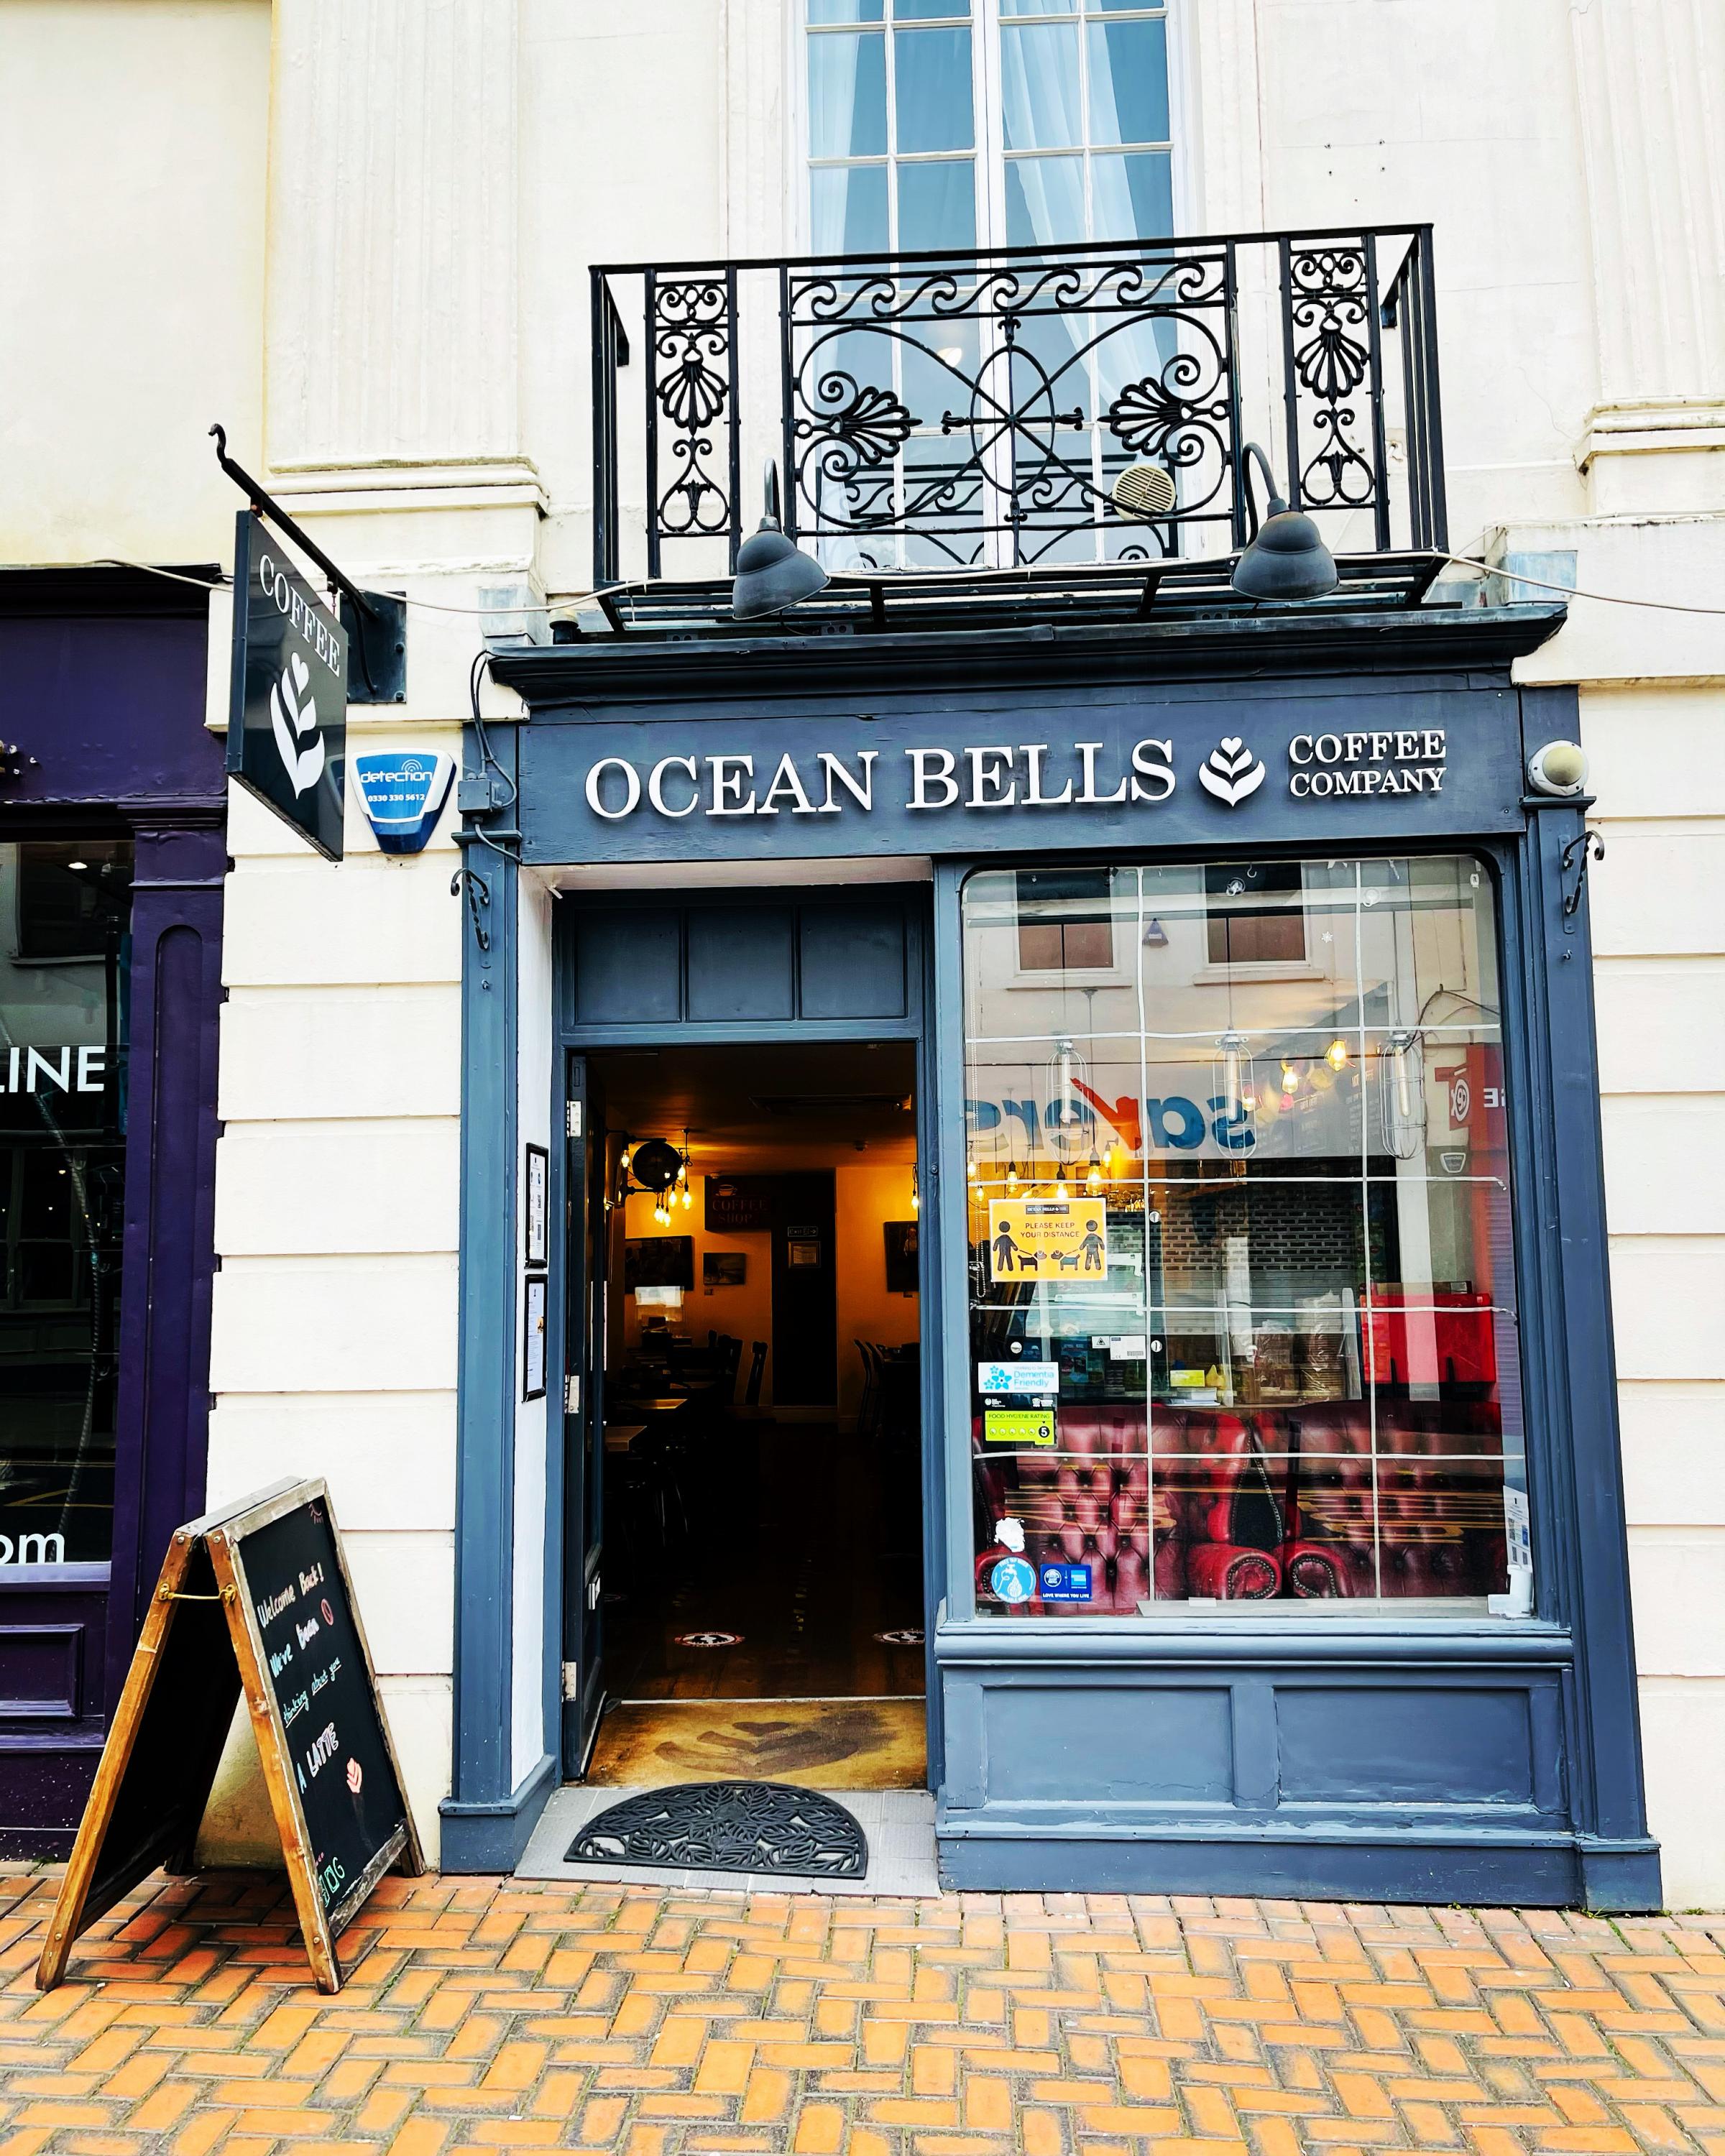 Ocean Bells is situated at 133, High Street